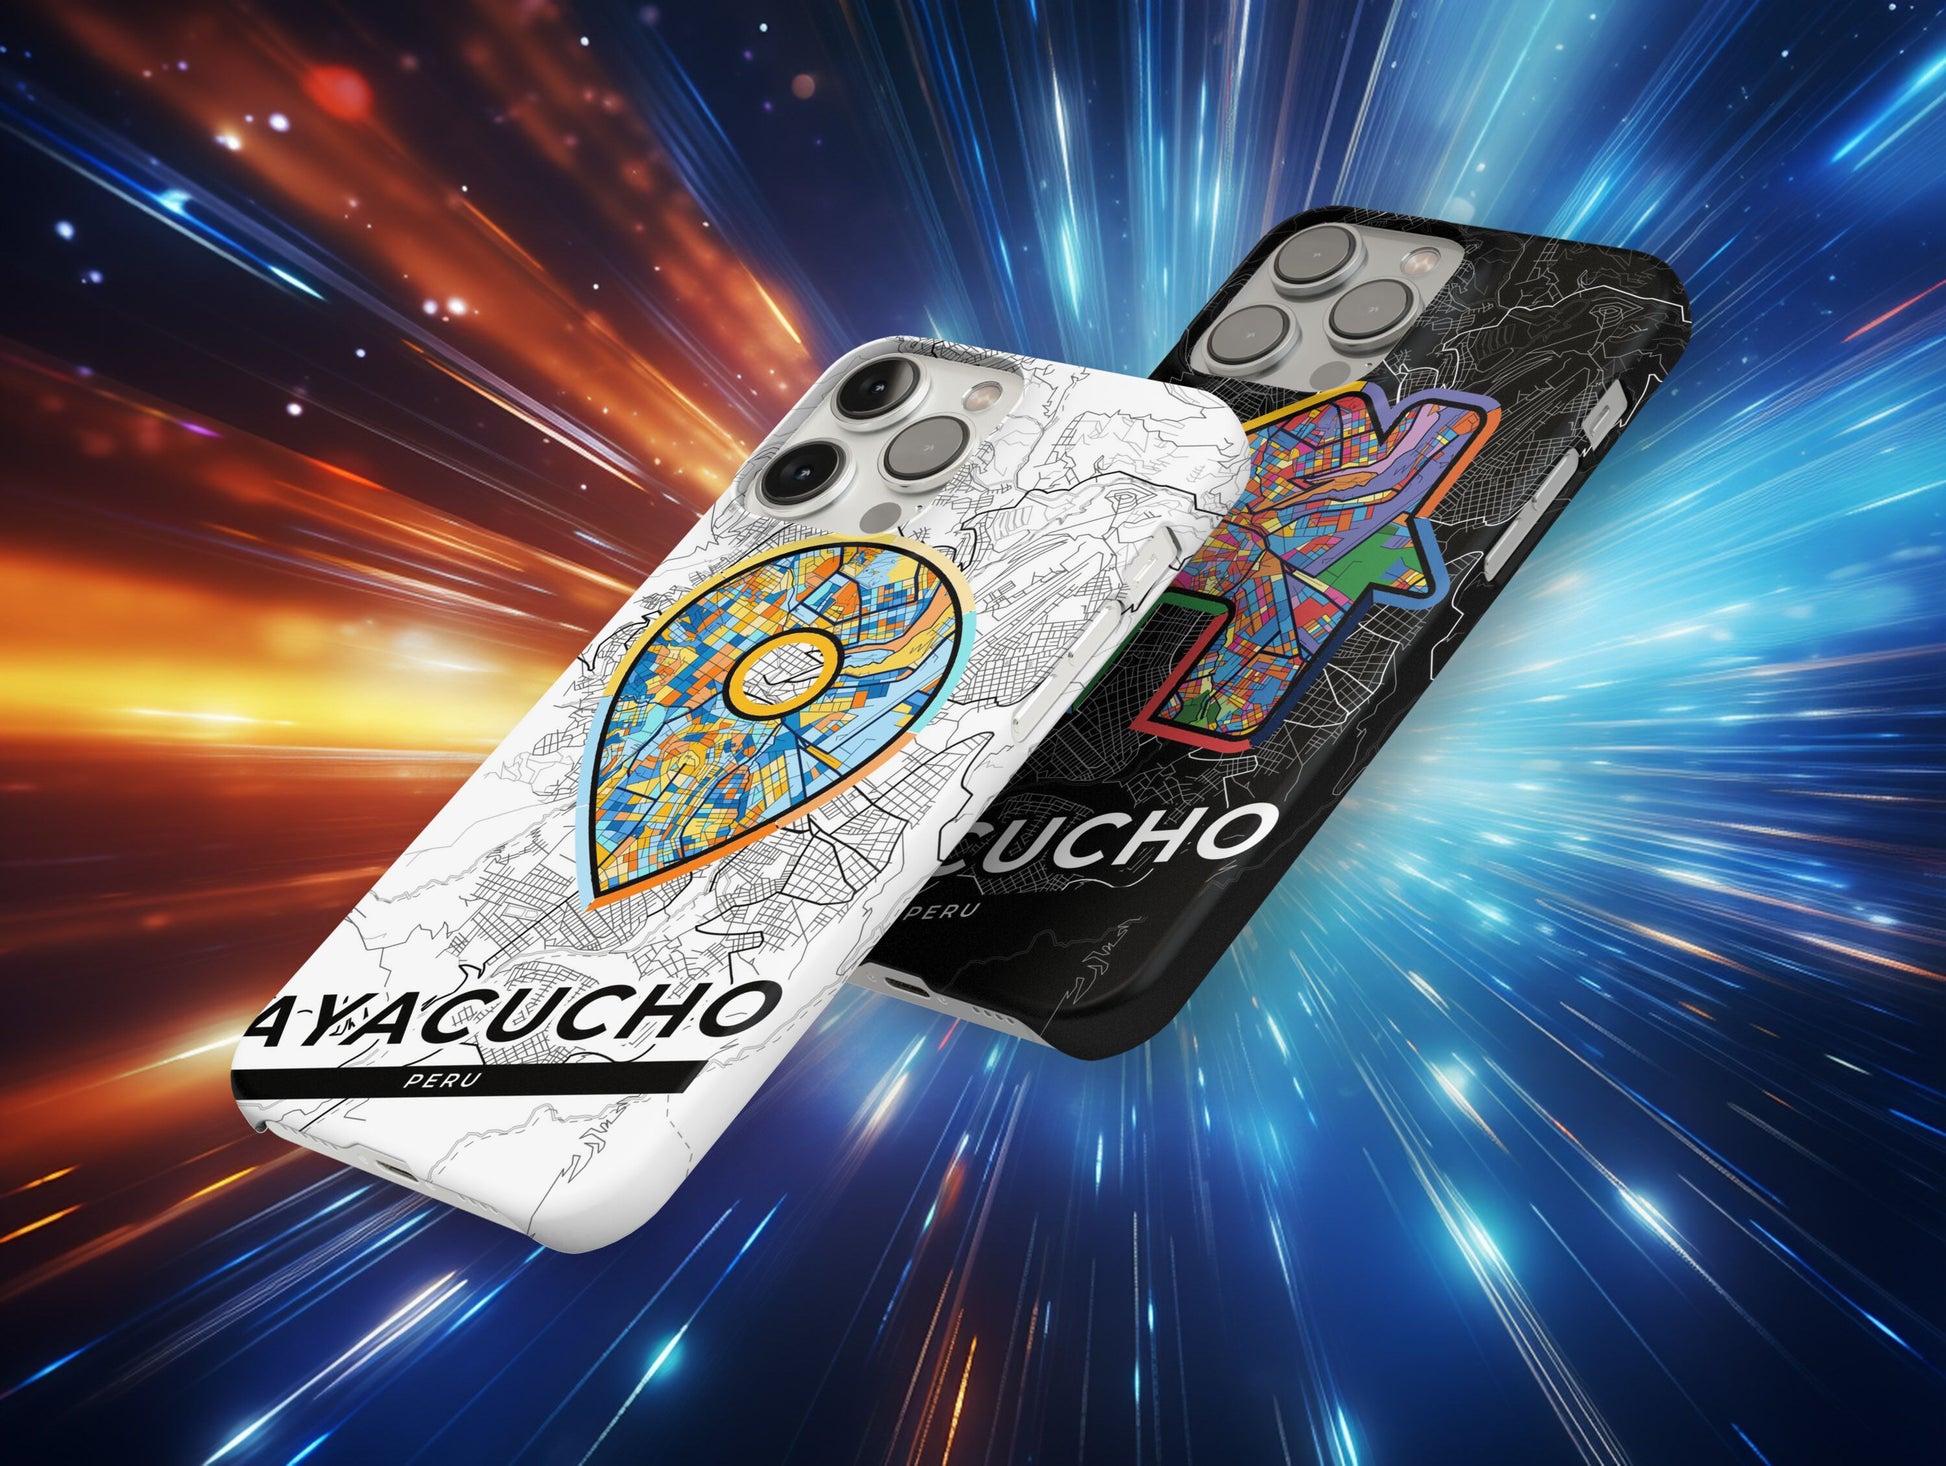 Ayacucho Peru slim phone case with colorful icon. Birthday, wedding or housewarming gift. Couple match cases.